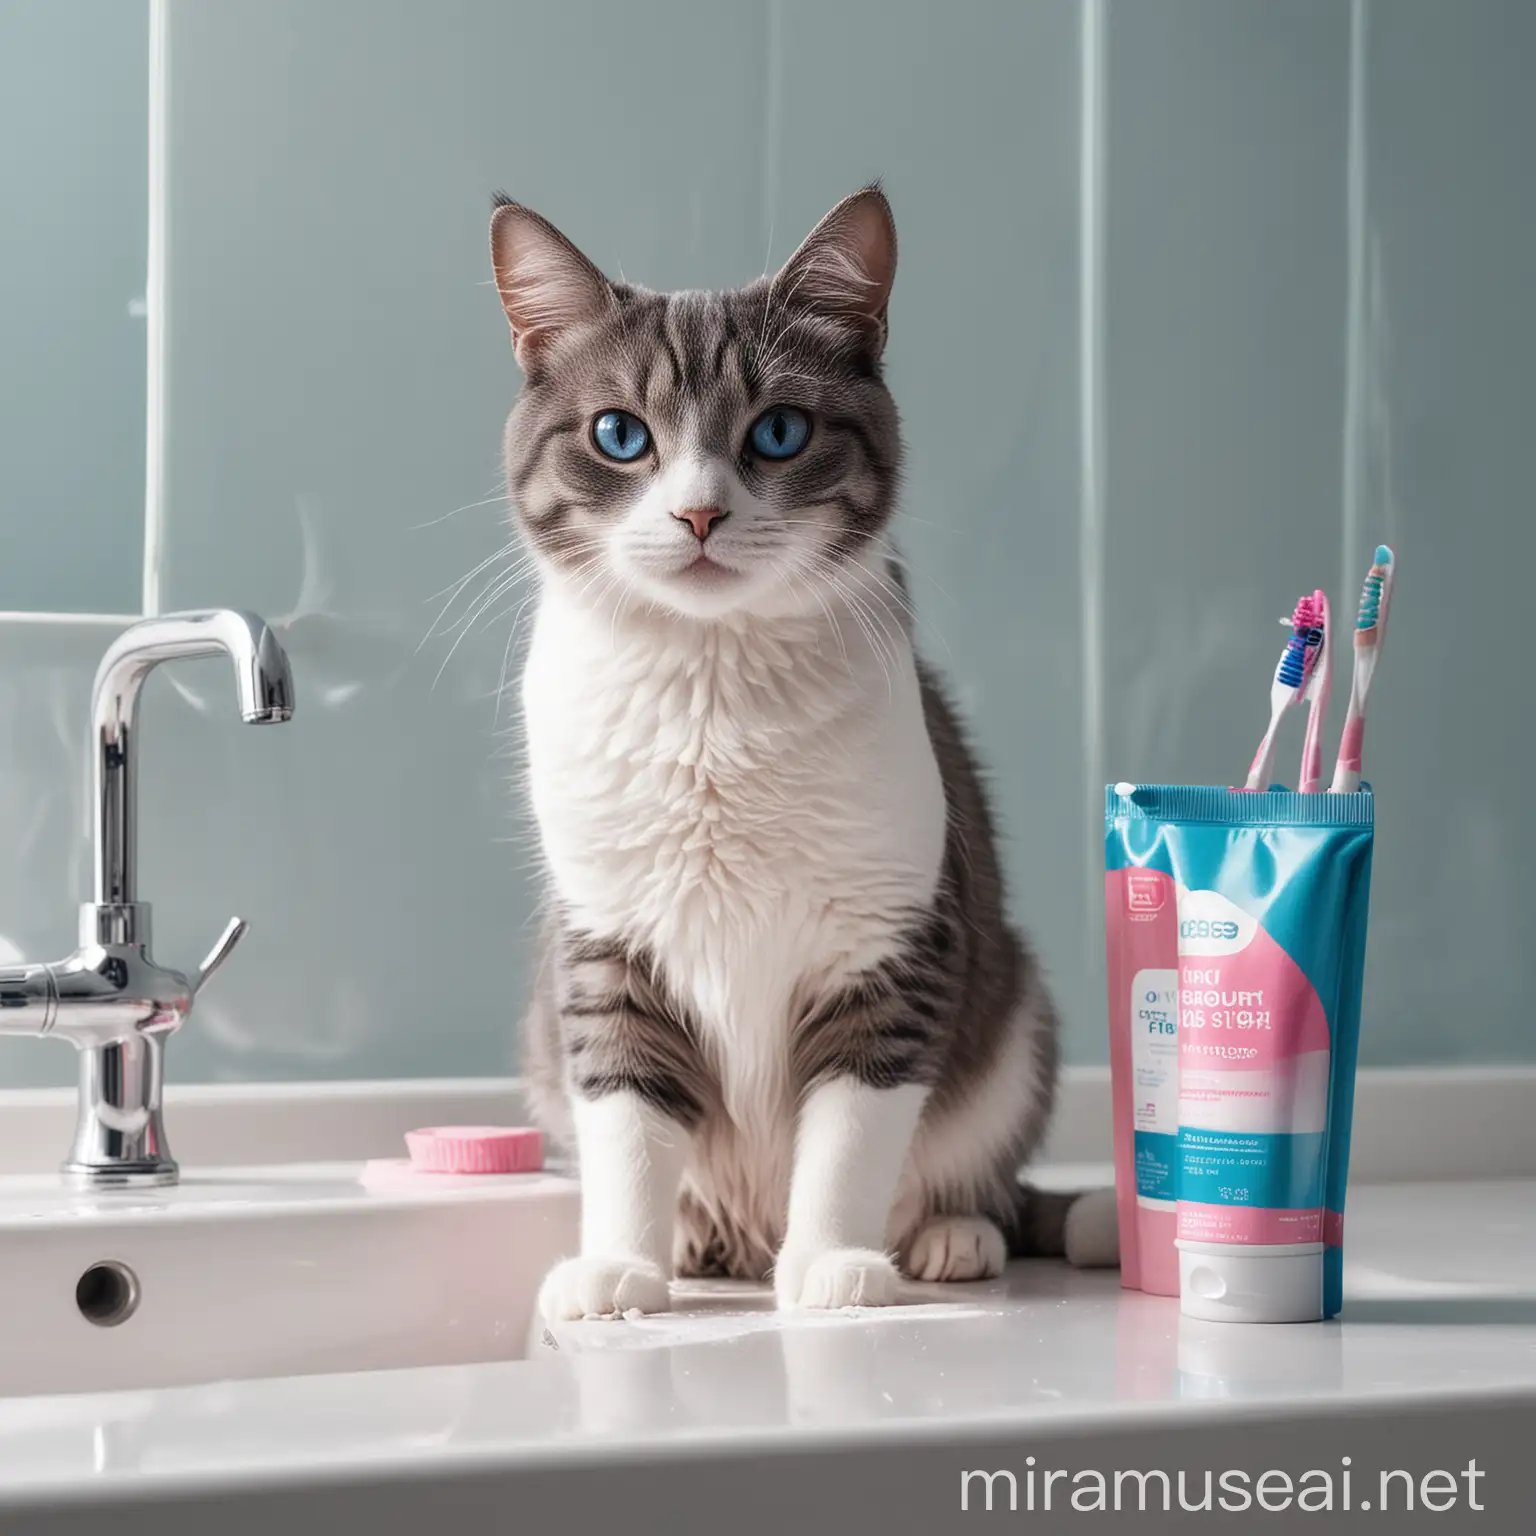 cat is sitting on the sink. Next to her is a glass with toothbrushes and toothpaste. Bright blue and pink tones